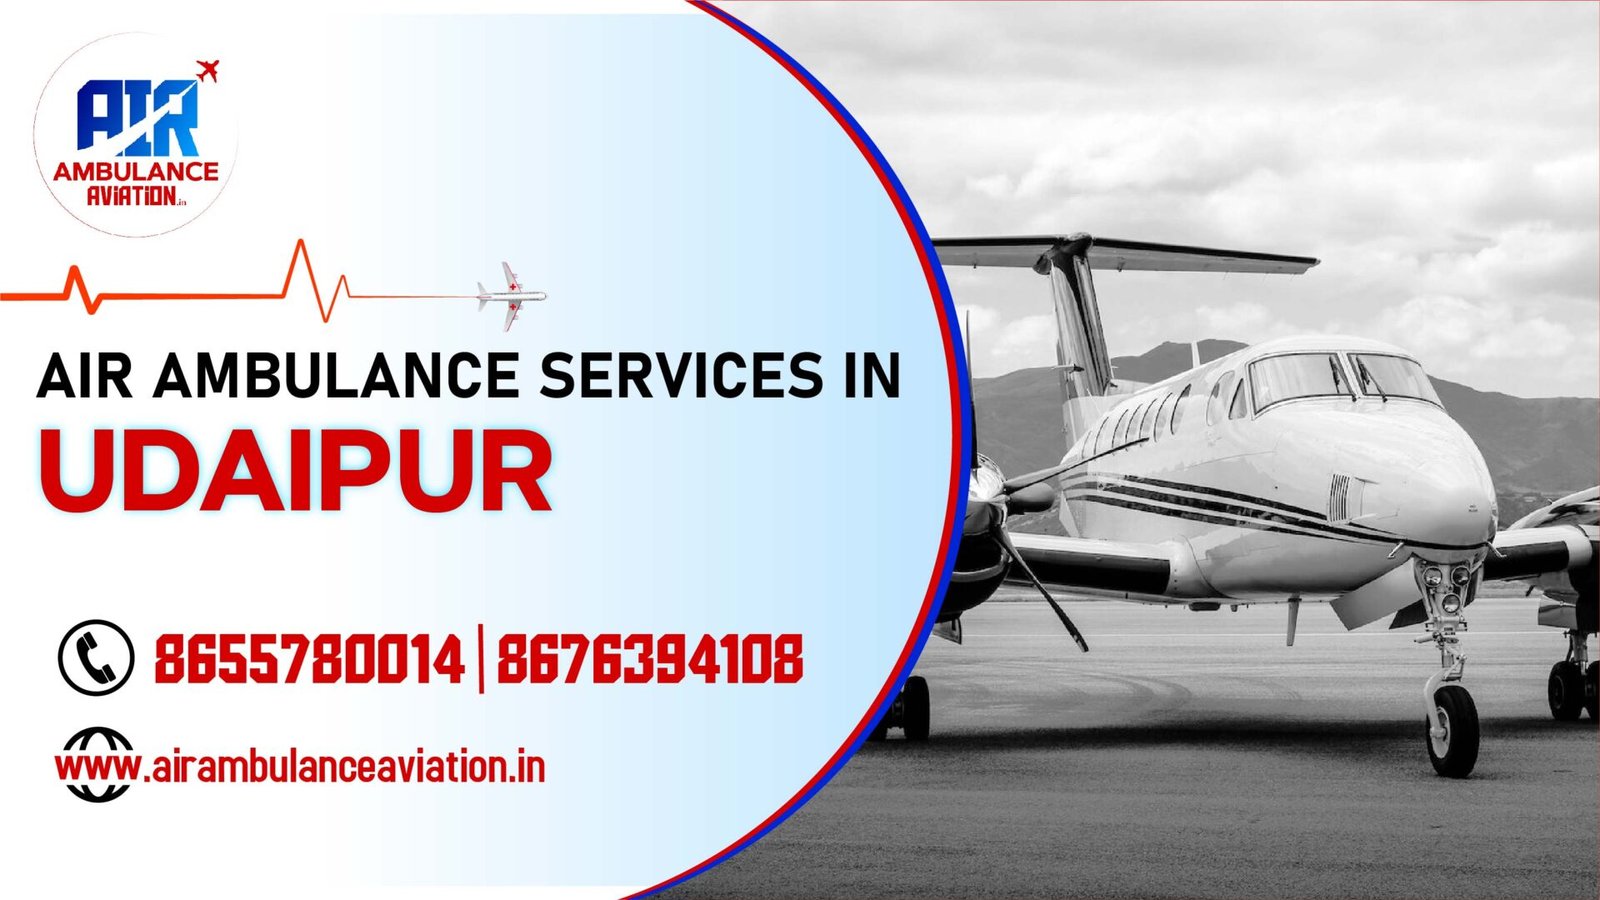 Air Ambulance services in Udaipur